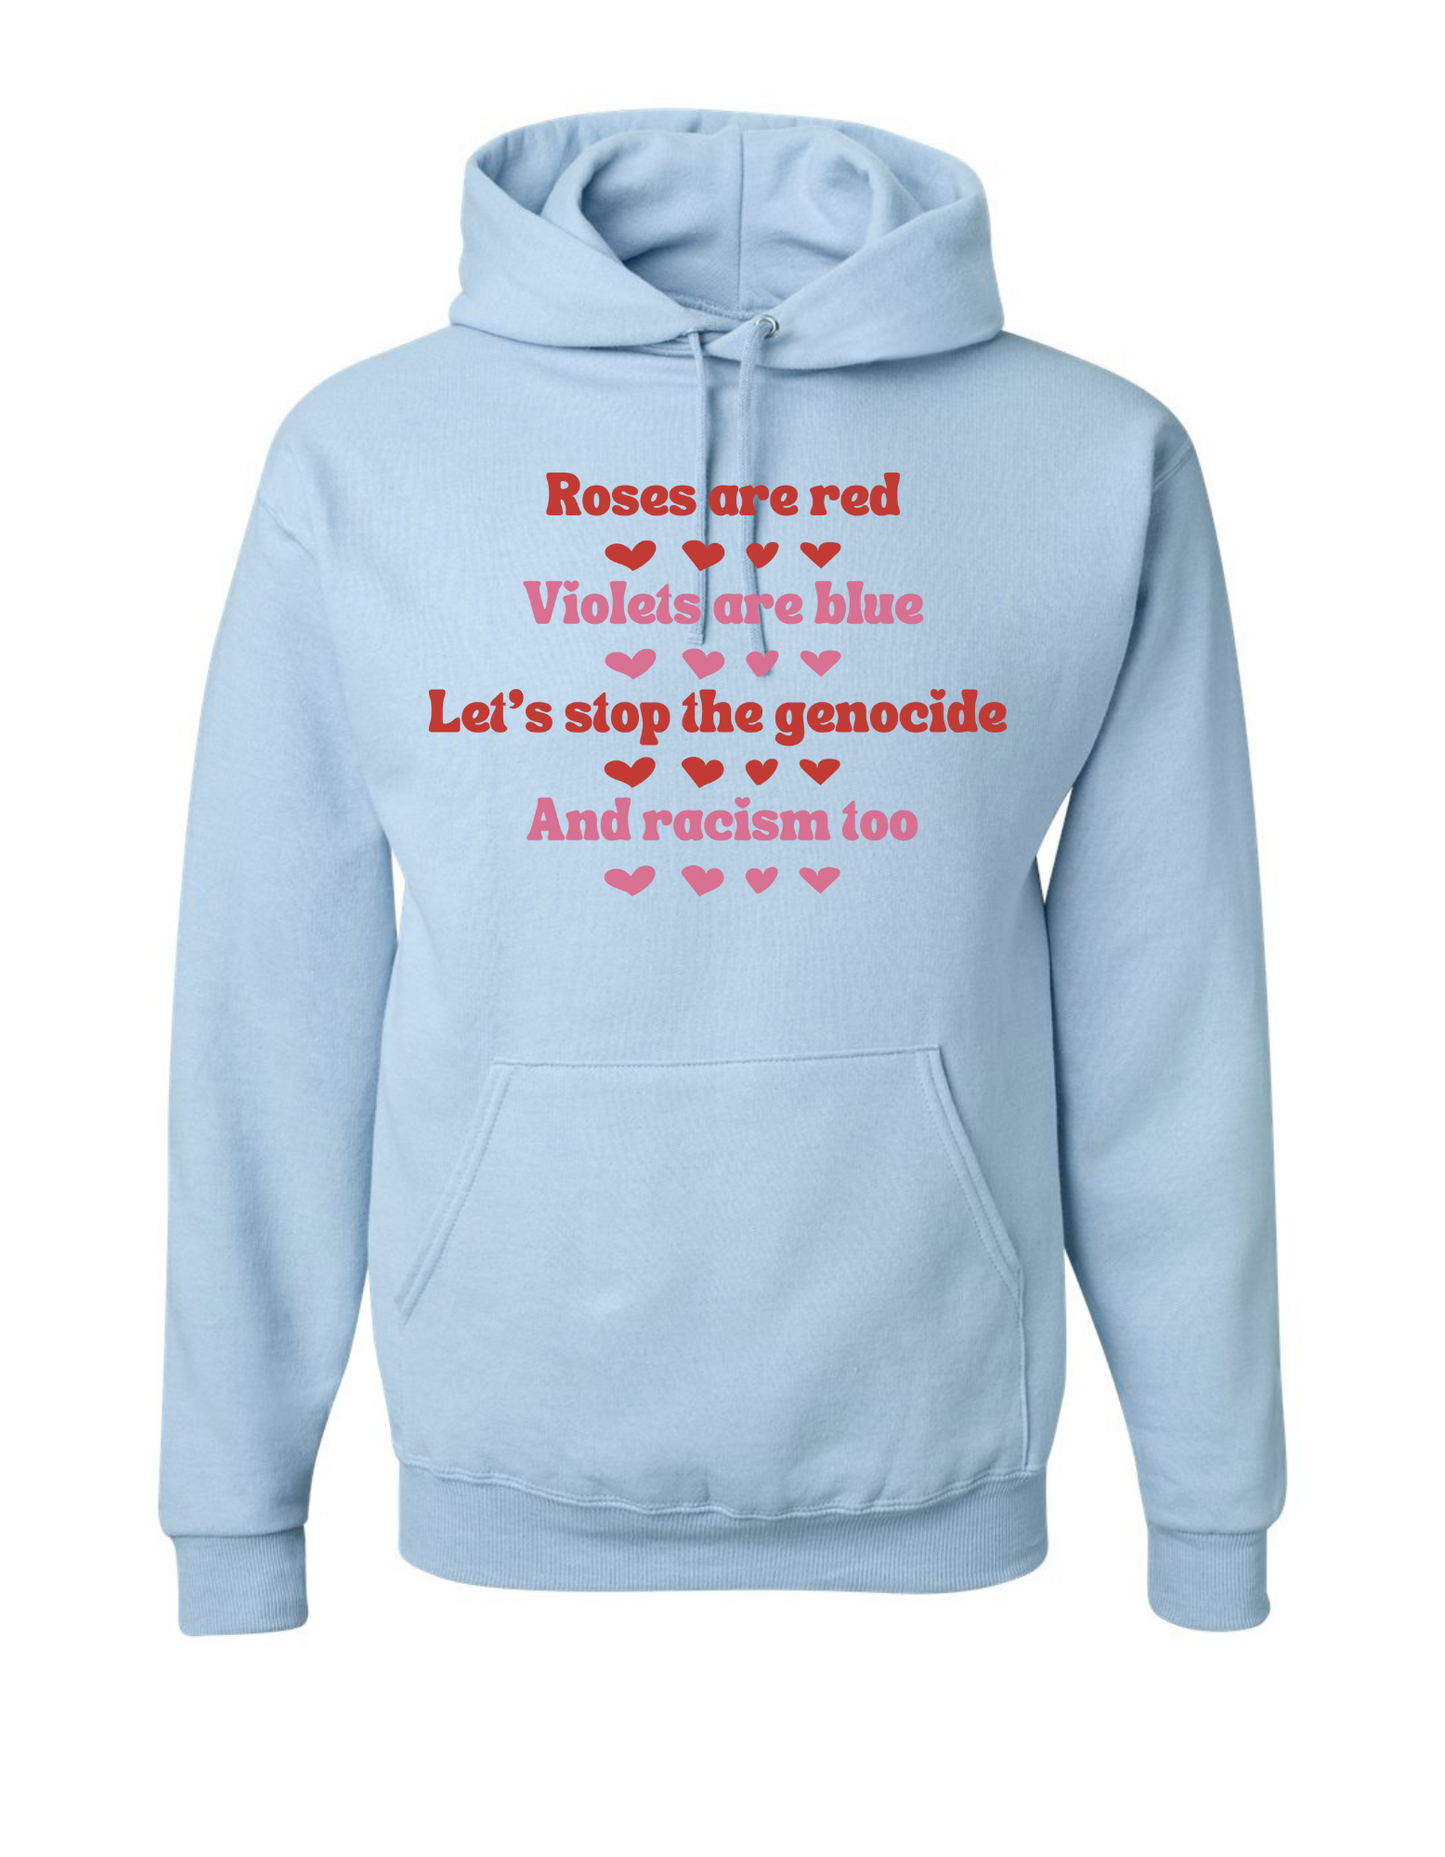 Rose Are Red Hoodie